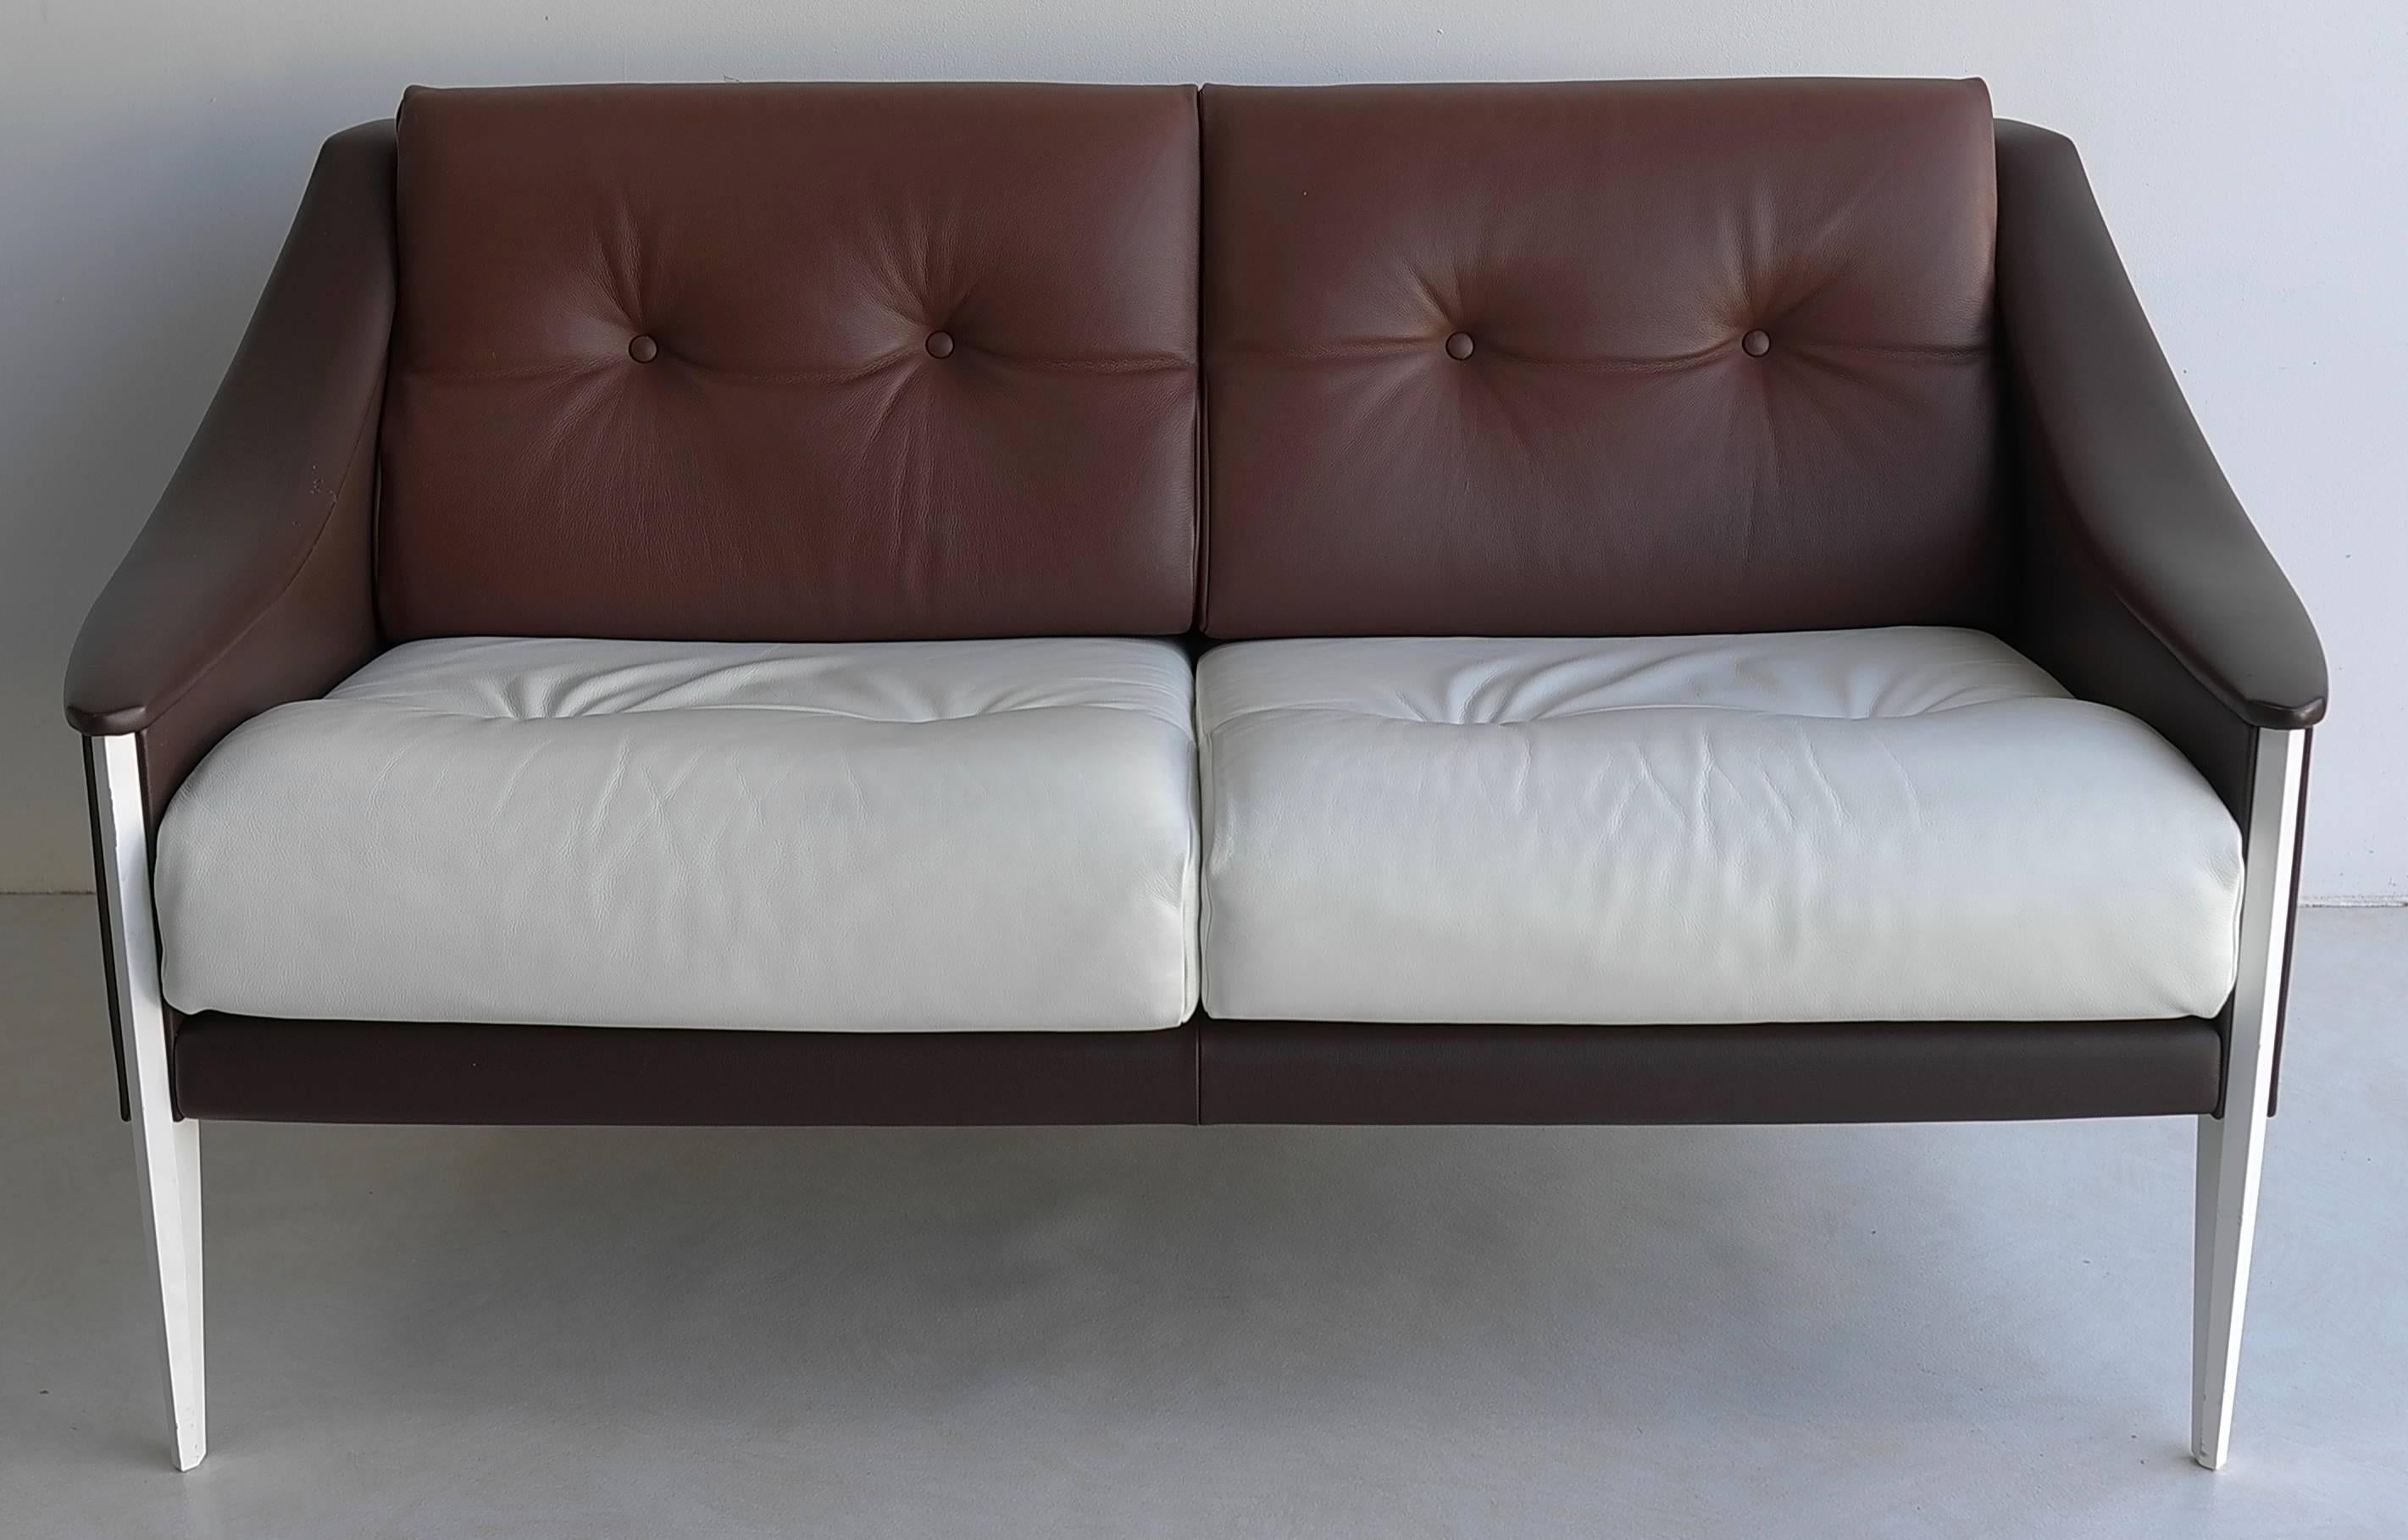 Gio Ponti Dezza sofa designed by Gio Ponti and produced by Poltrona Frau.
In different leather, brown and white tones with white wooden frame.